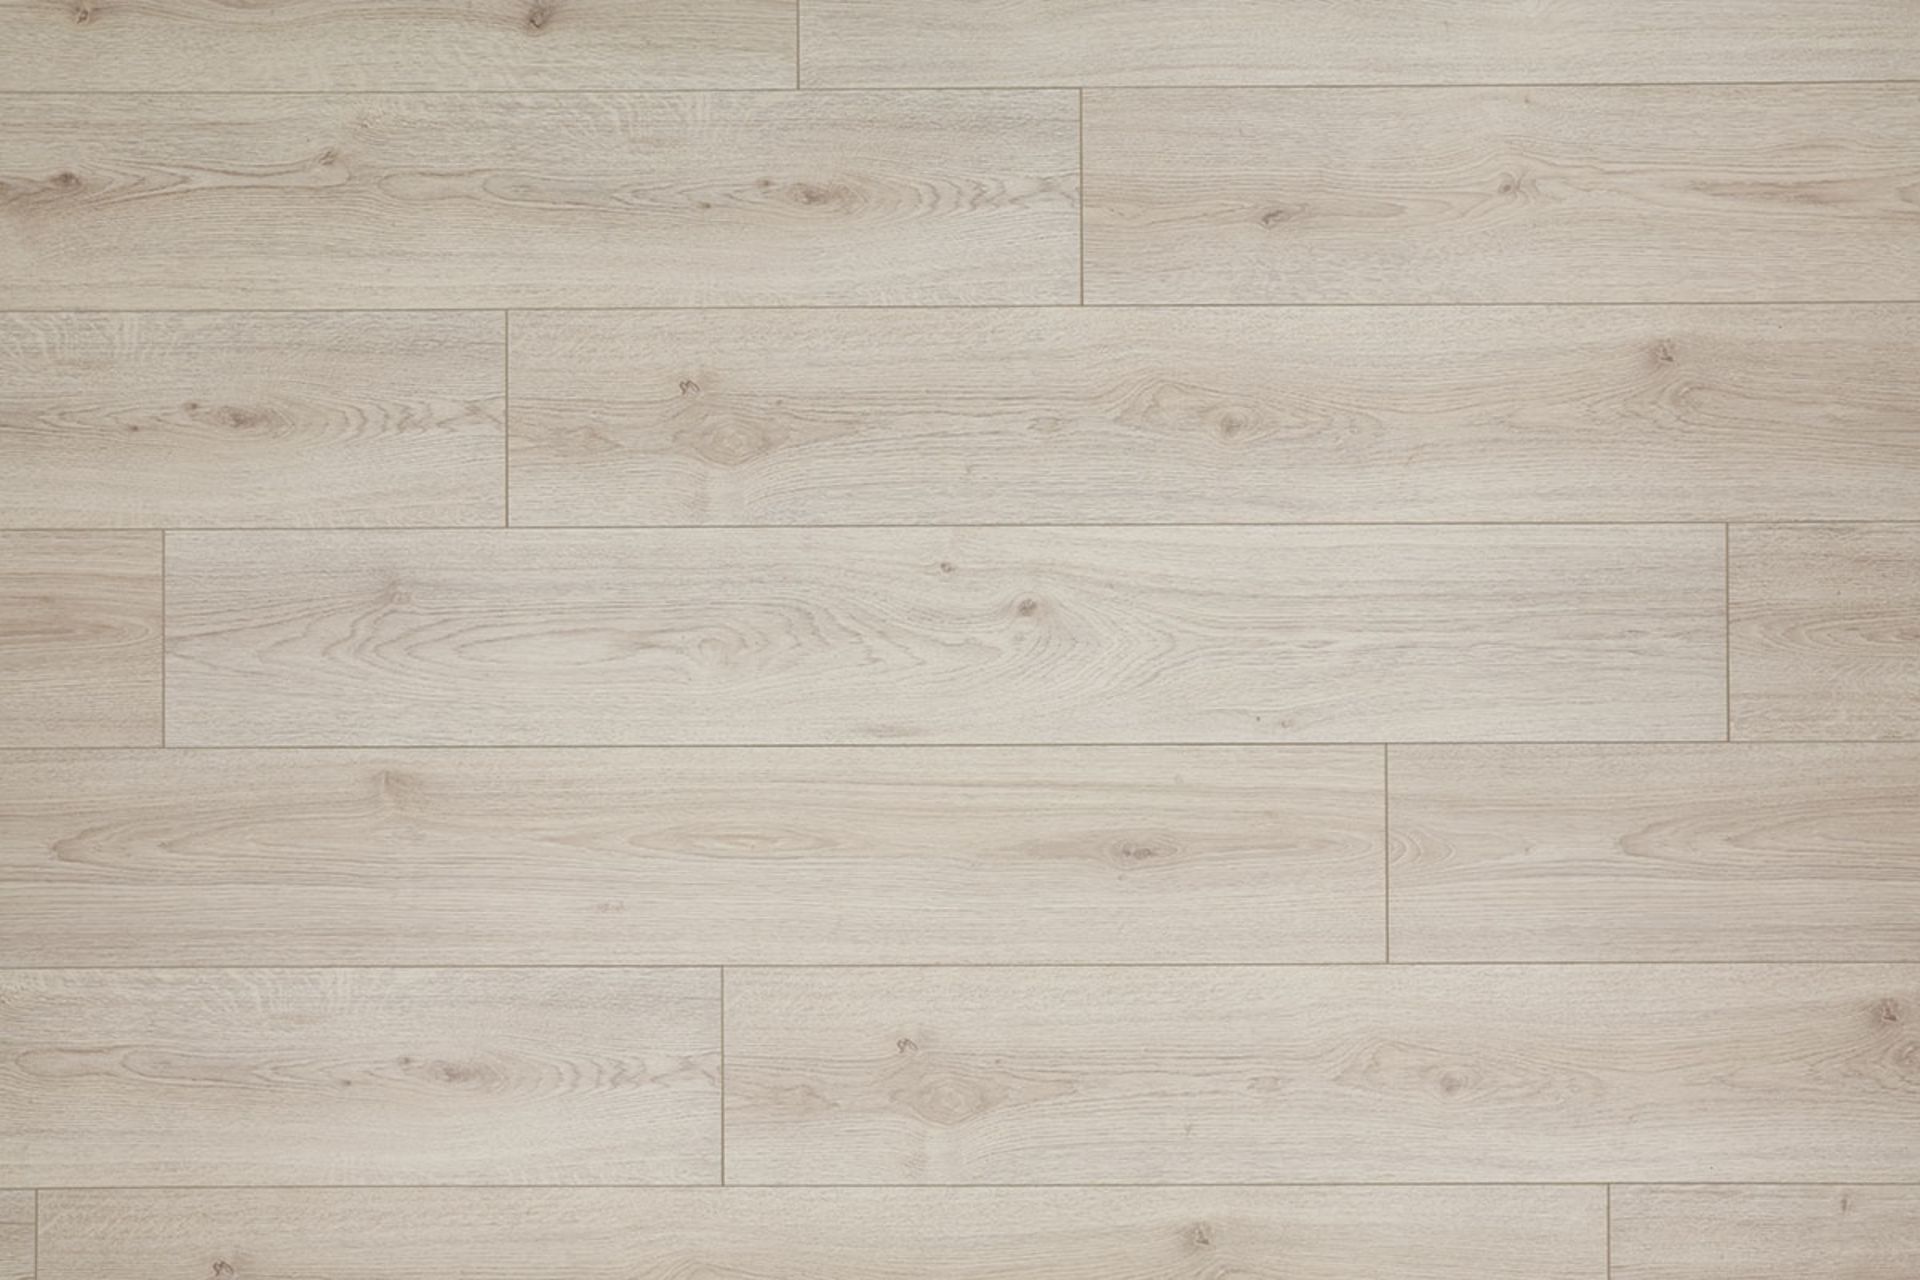 NEW 9.56m2 LAMINATE FLOORING TREND GREY OAK. With a warm grey hue and an authentic natural grai... - Image 2 of 2